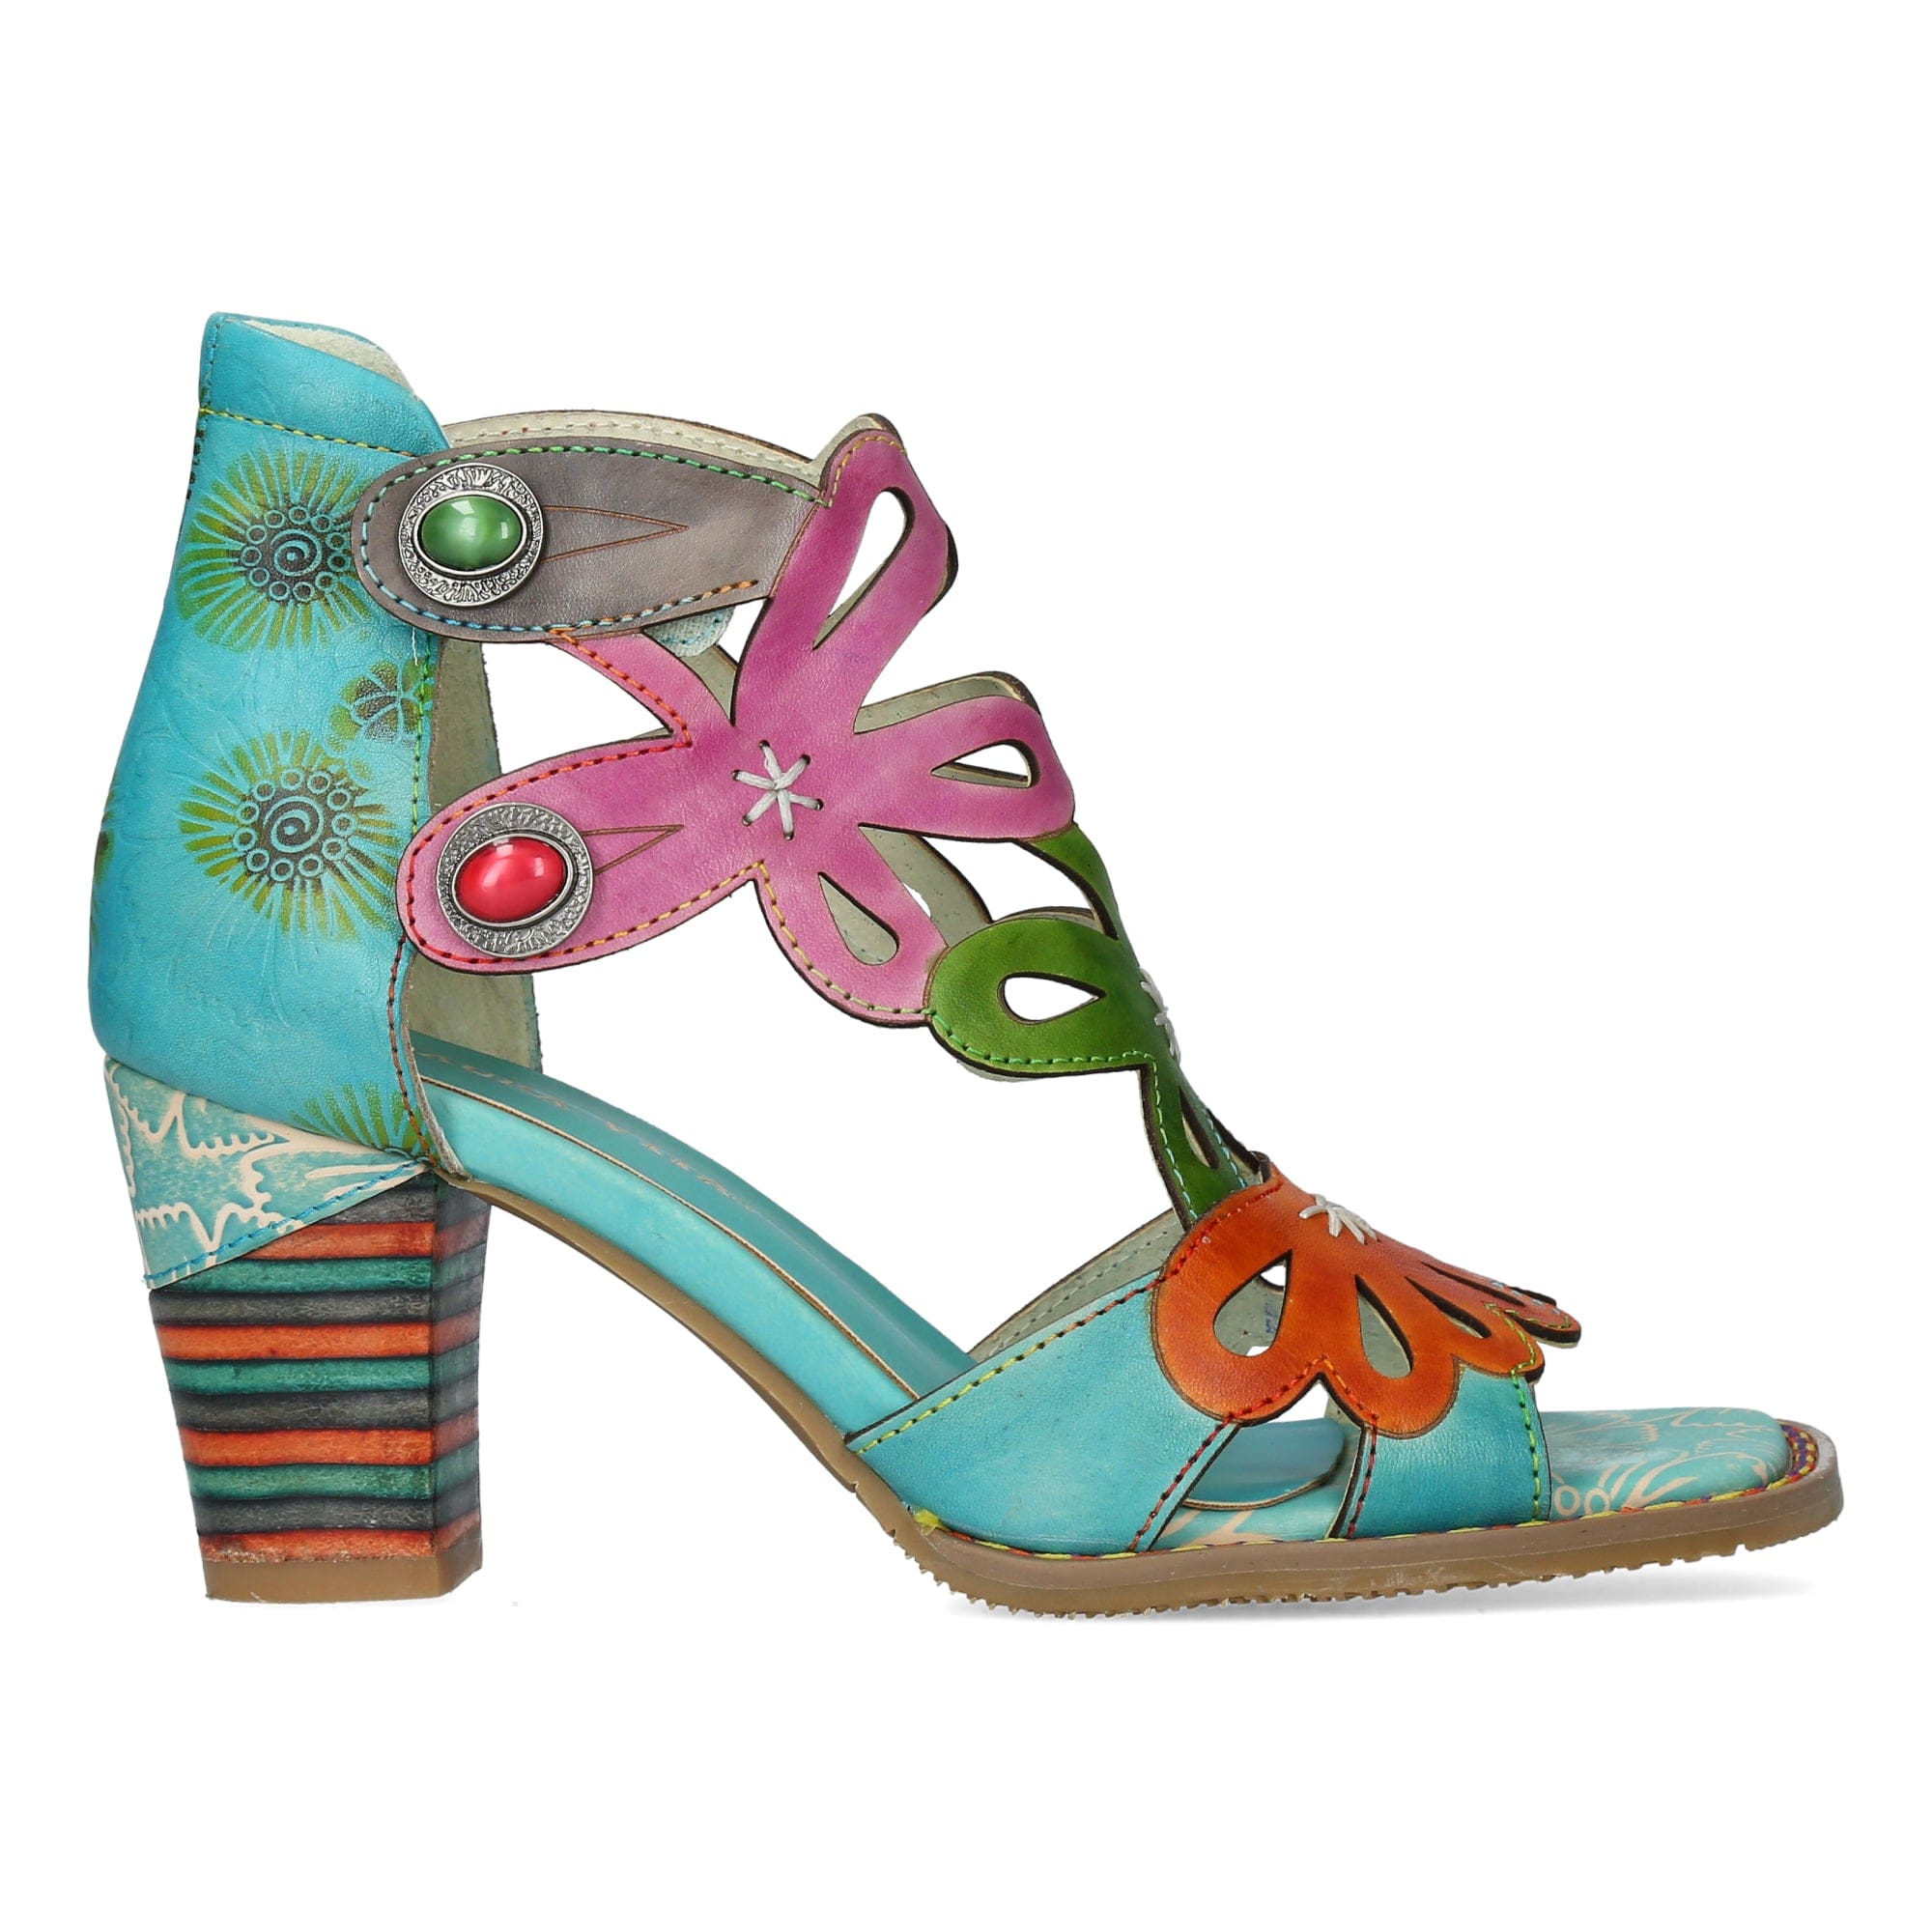 Chaussure NOURAO 01 - 35 / Turquoise - Sandale